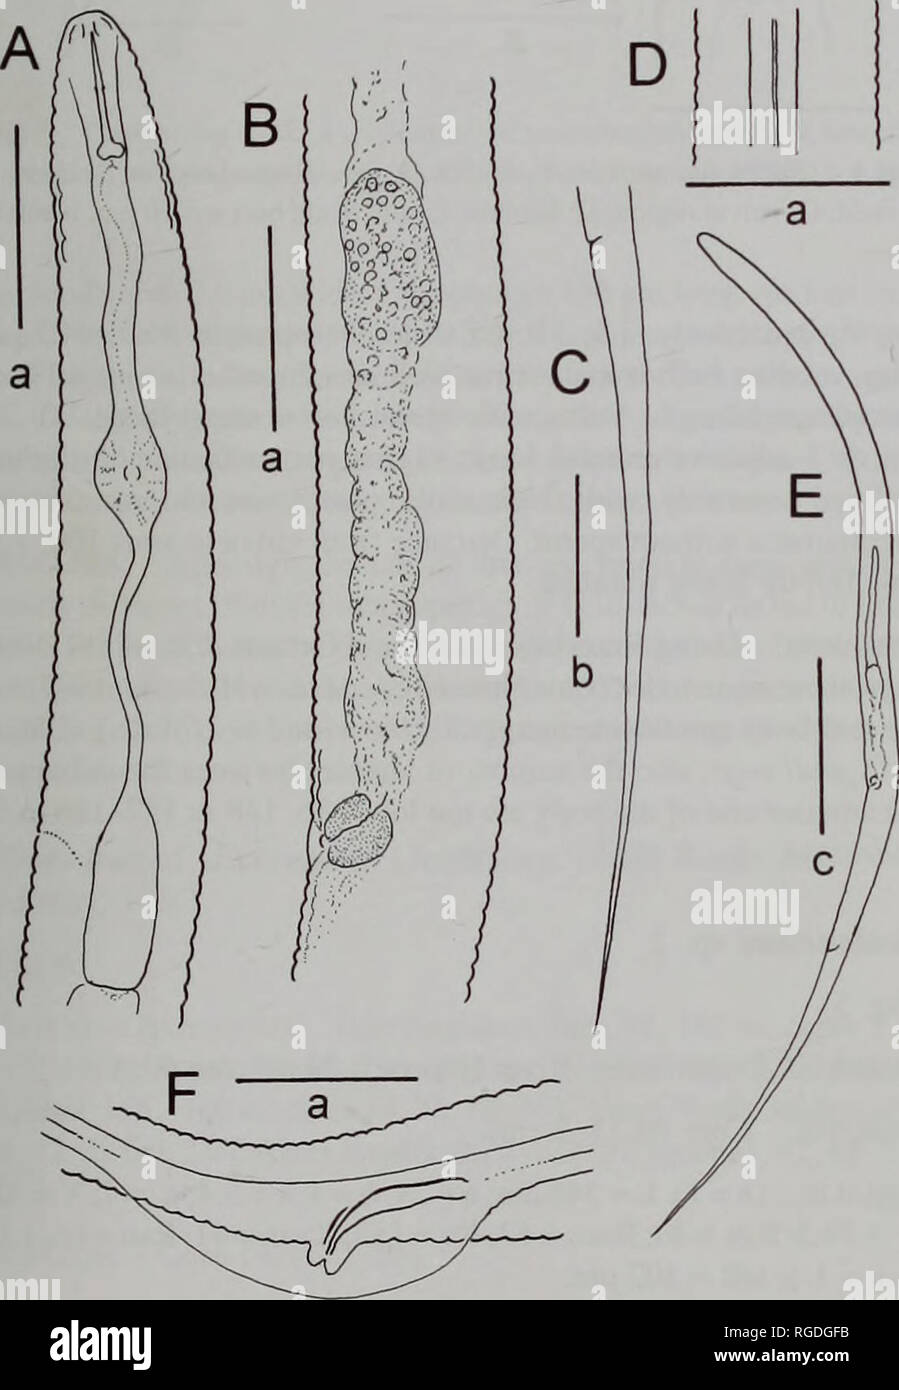 . Bulletin of the Natural History Museum Zoology. FRESHWATER NEMATODES FROM LOCH NESS DESCRIPTIONS OF SPECIES Aglenchus agricola (de Man, 1884) Andrassy, 1954 (Fig. 2) Material examined. Fort Augustus Bay: 92, 105 m; cores 2, 3; 29$. Foyers Plateau: 150-161 m; cores 14-17; 299 46*6*. River Foyers: 0.14-0.39 m; cores 40, 43, 45: 2 99, 266. Horizon. Core 2 (2-3 cm), core 14 (3^4 cm), core 40 (2-3 cm). Females, (n = 5). L = 650 urn (625-667): a = 31 (26.4-34.4); b = 6.6 (6.3-6.9); c = 3.3 (3.2-3.4); c' = 14.5 (12.7-15.8); V = 55.1 (53- 56); V = 77.6 (76.5-78.4); tail/V-a = 1.9 (1.7-2.0): tail = 1 Stock Photo